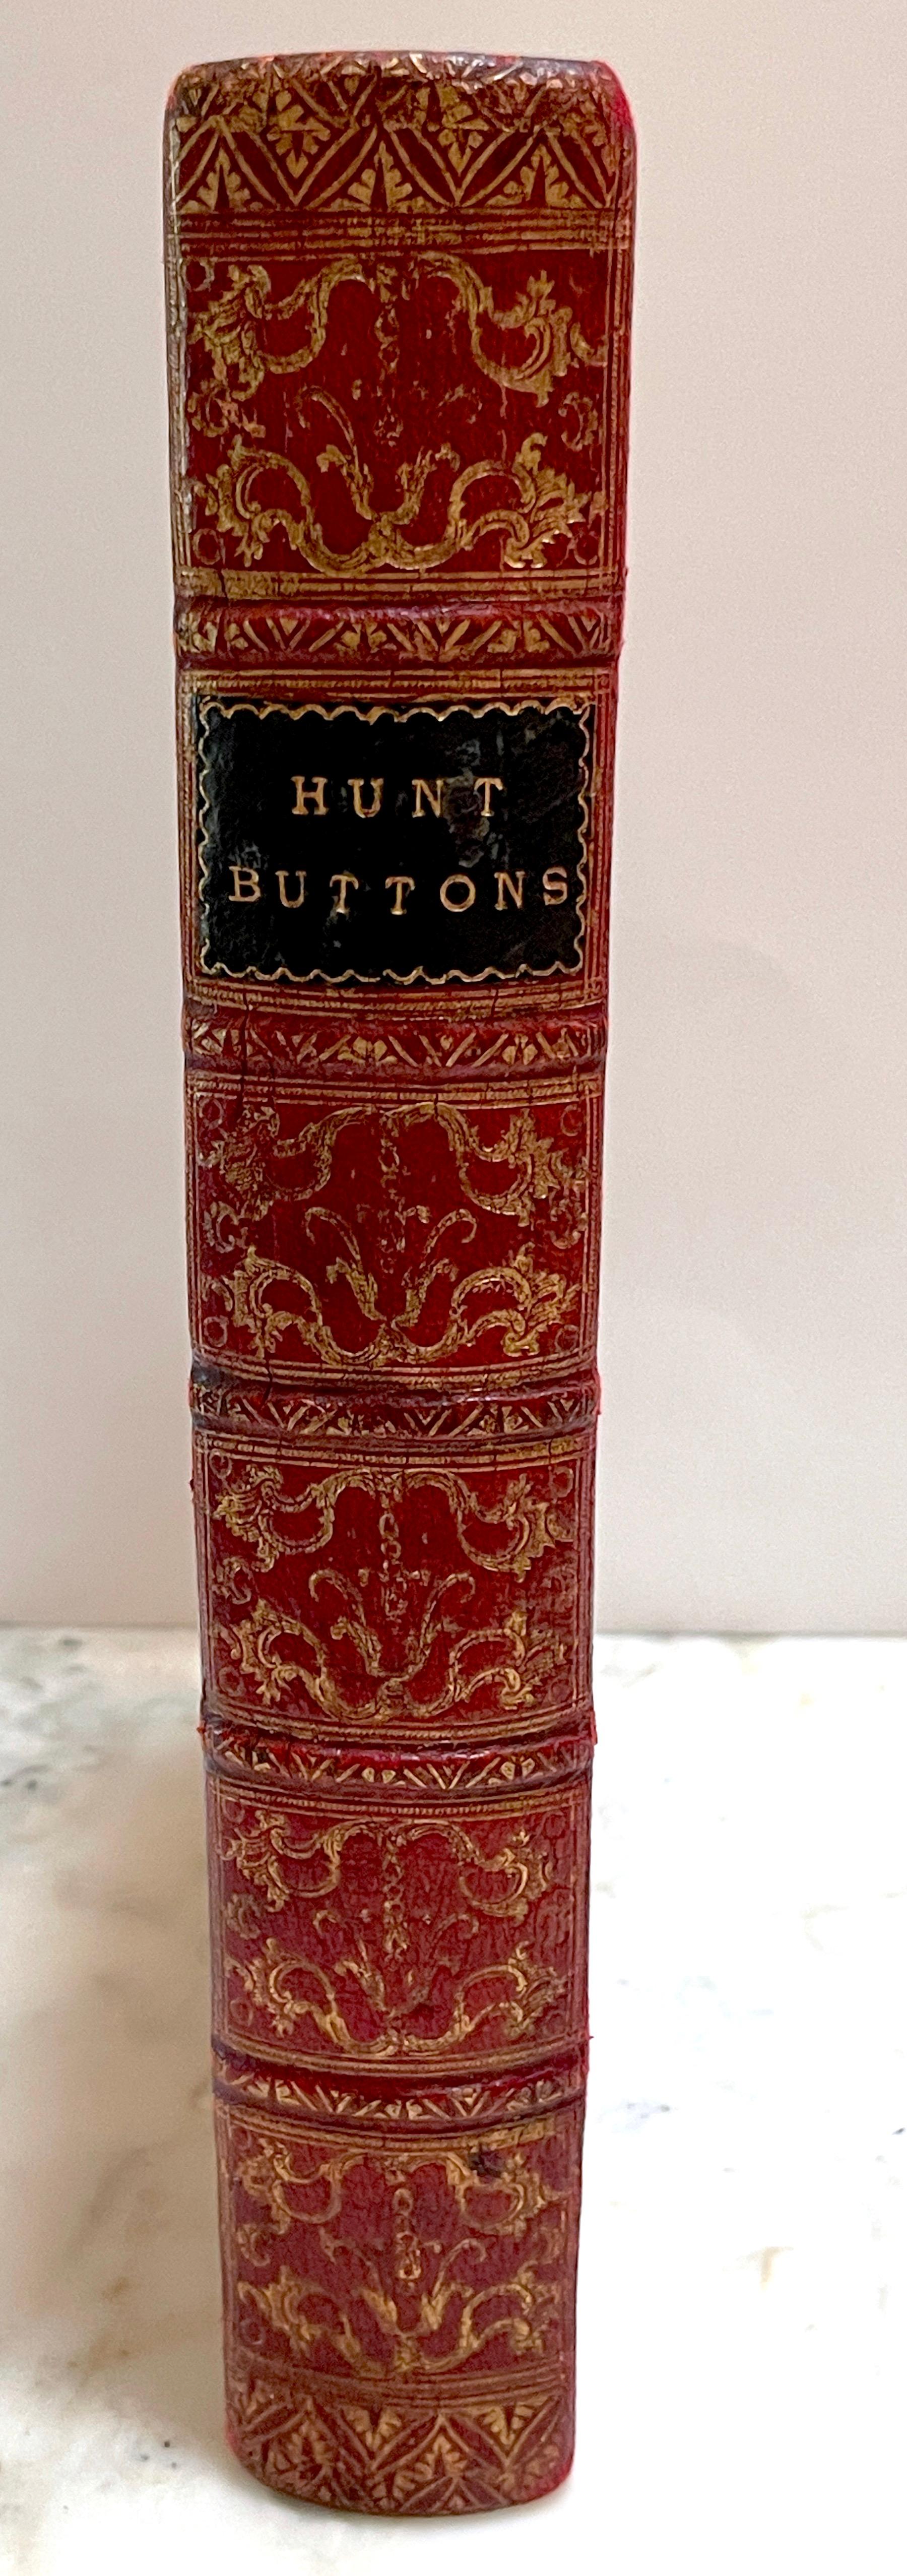 Gilt 19th C. Red Embossed Leather Bound ' Faux / Dummy' Book Box 'Hunt Buttons' 